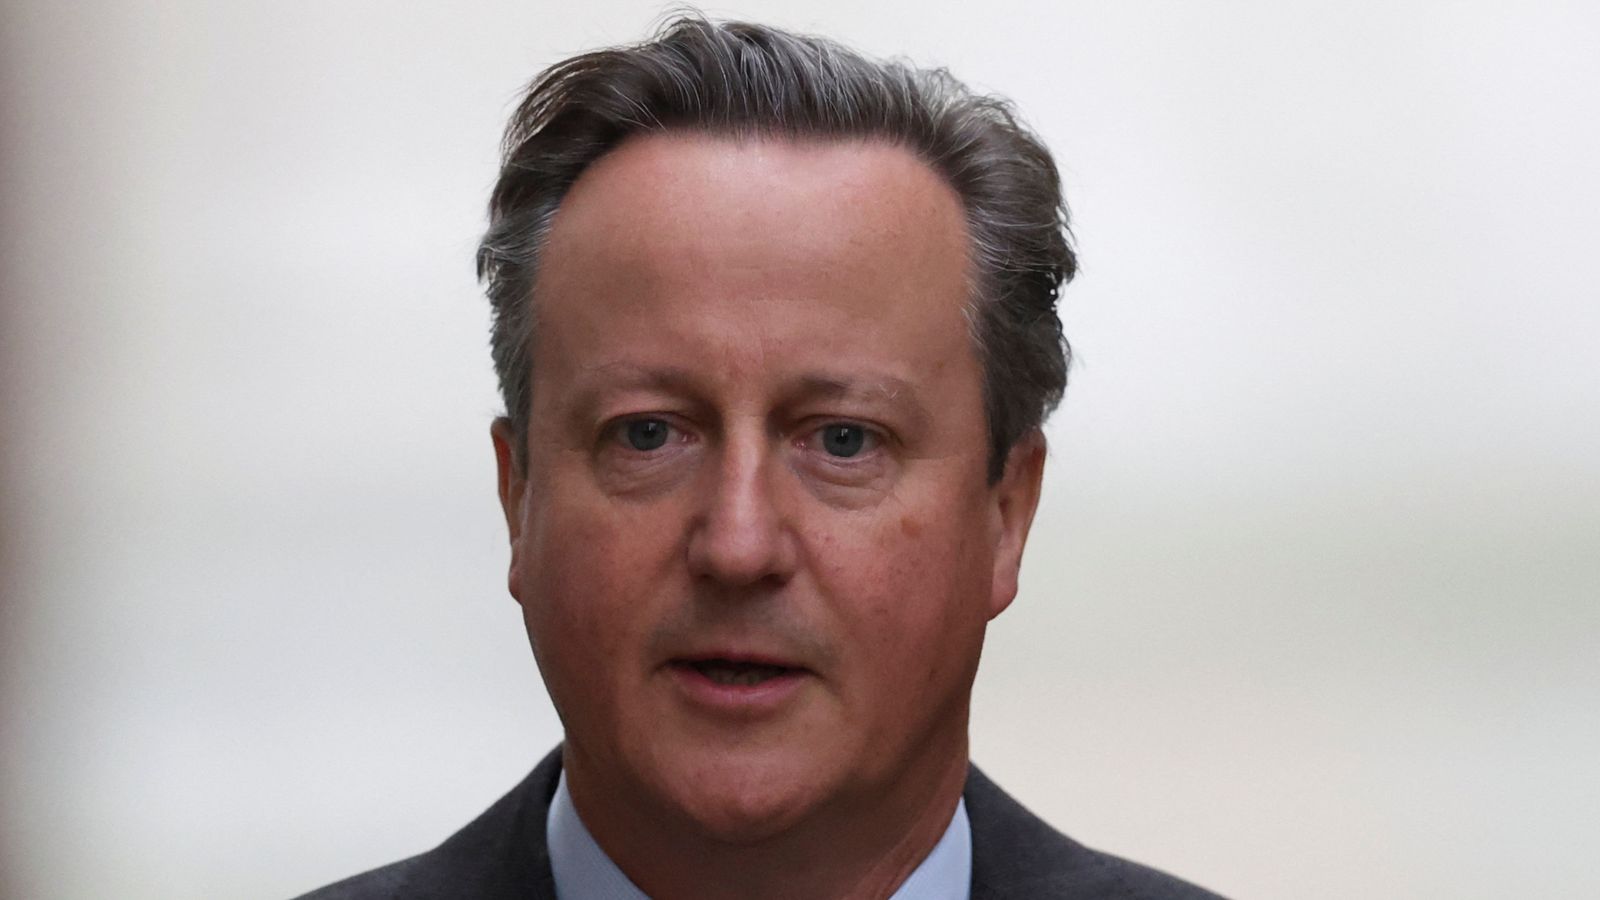 David Cameron To Be Known As Lord Cameron Of Chipping Norton With New Peerage Uk News Sky News